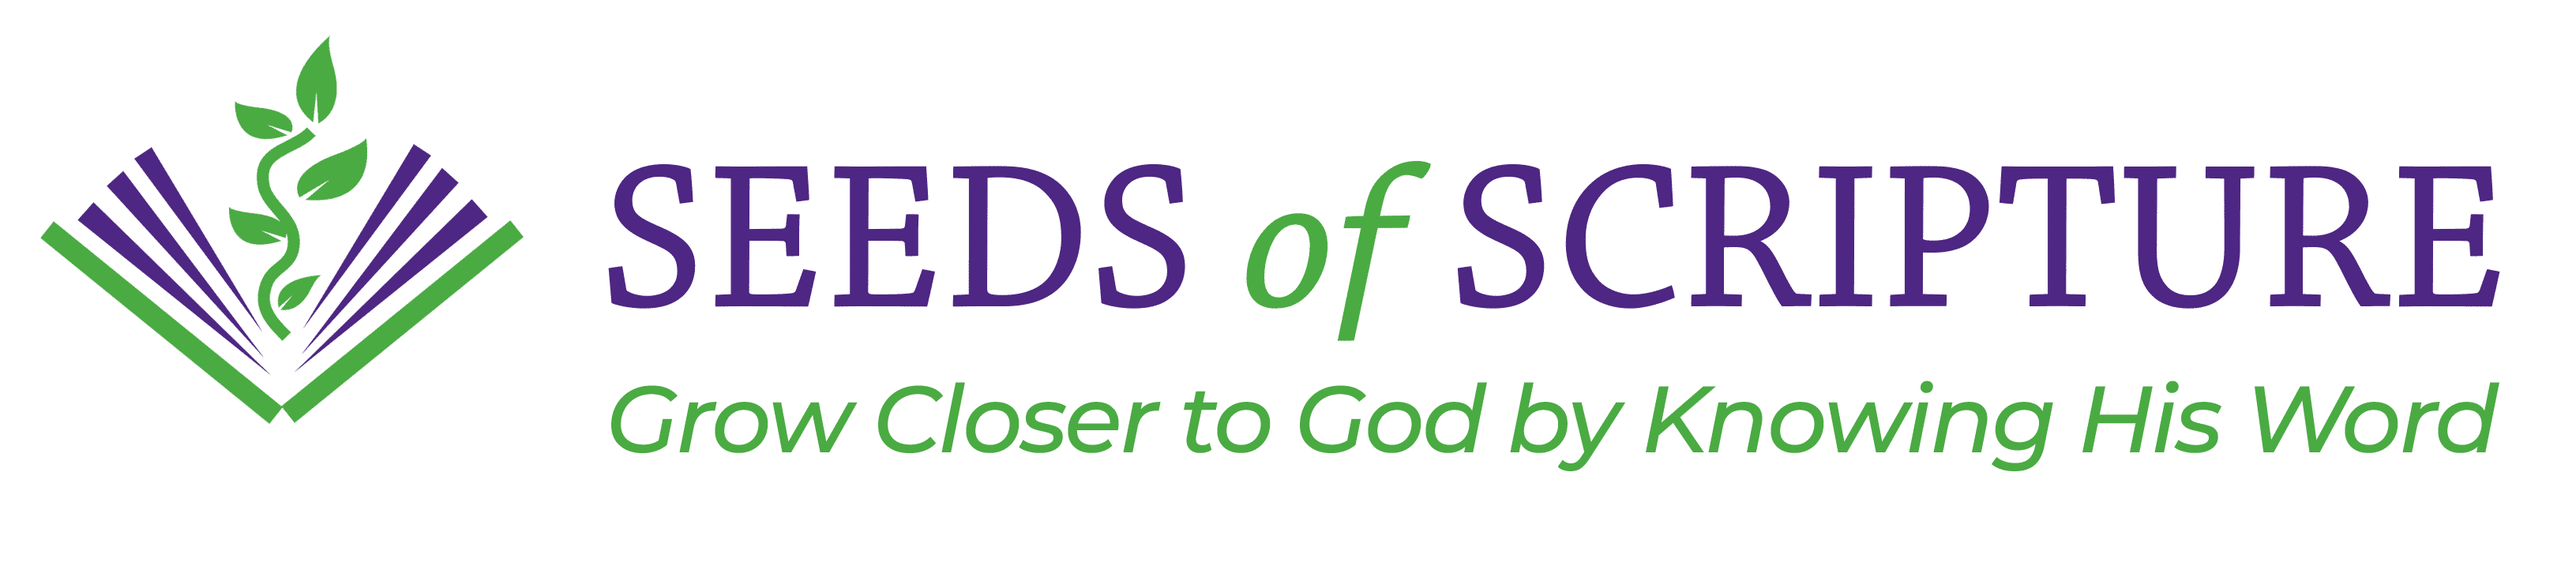 Seeds of Scripture | Grow Closer to God by Knowing His Word